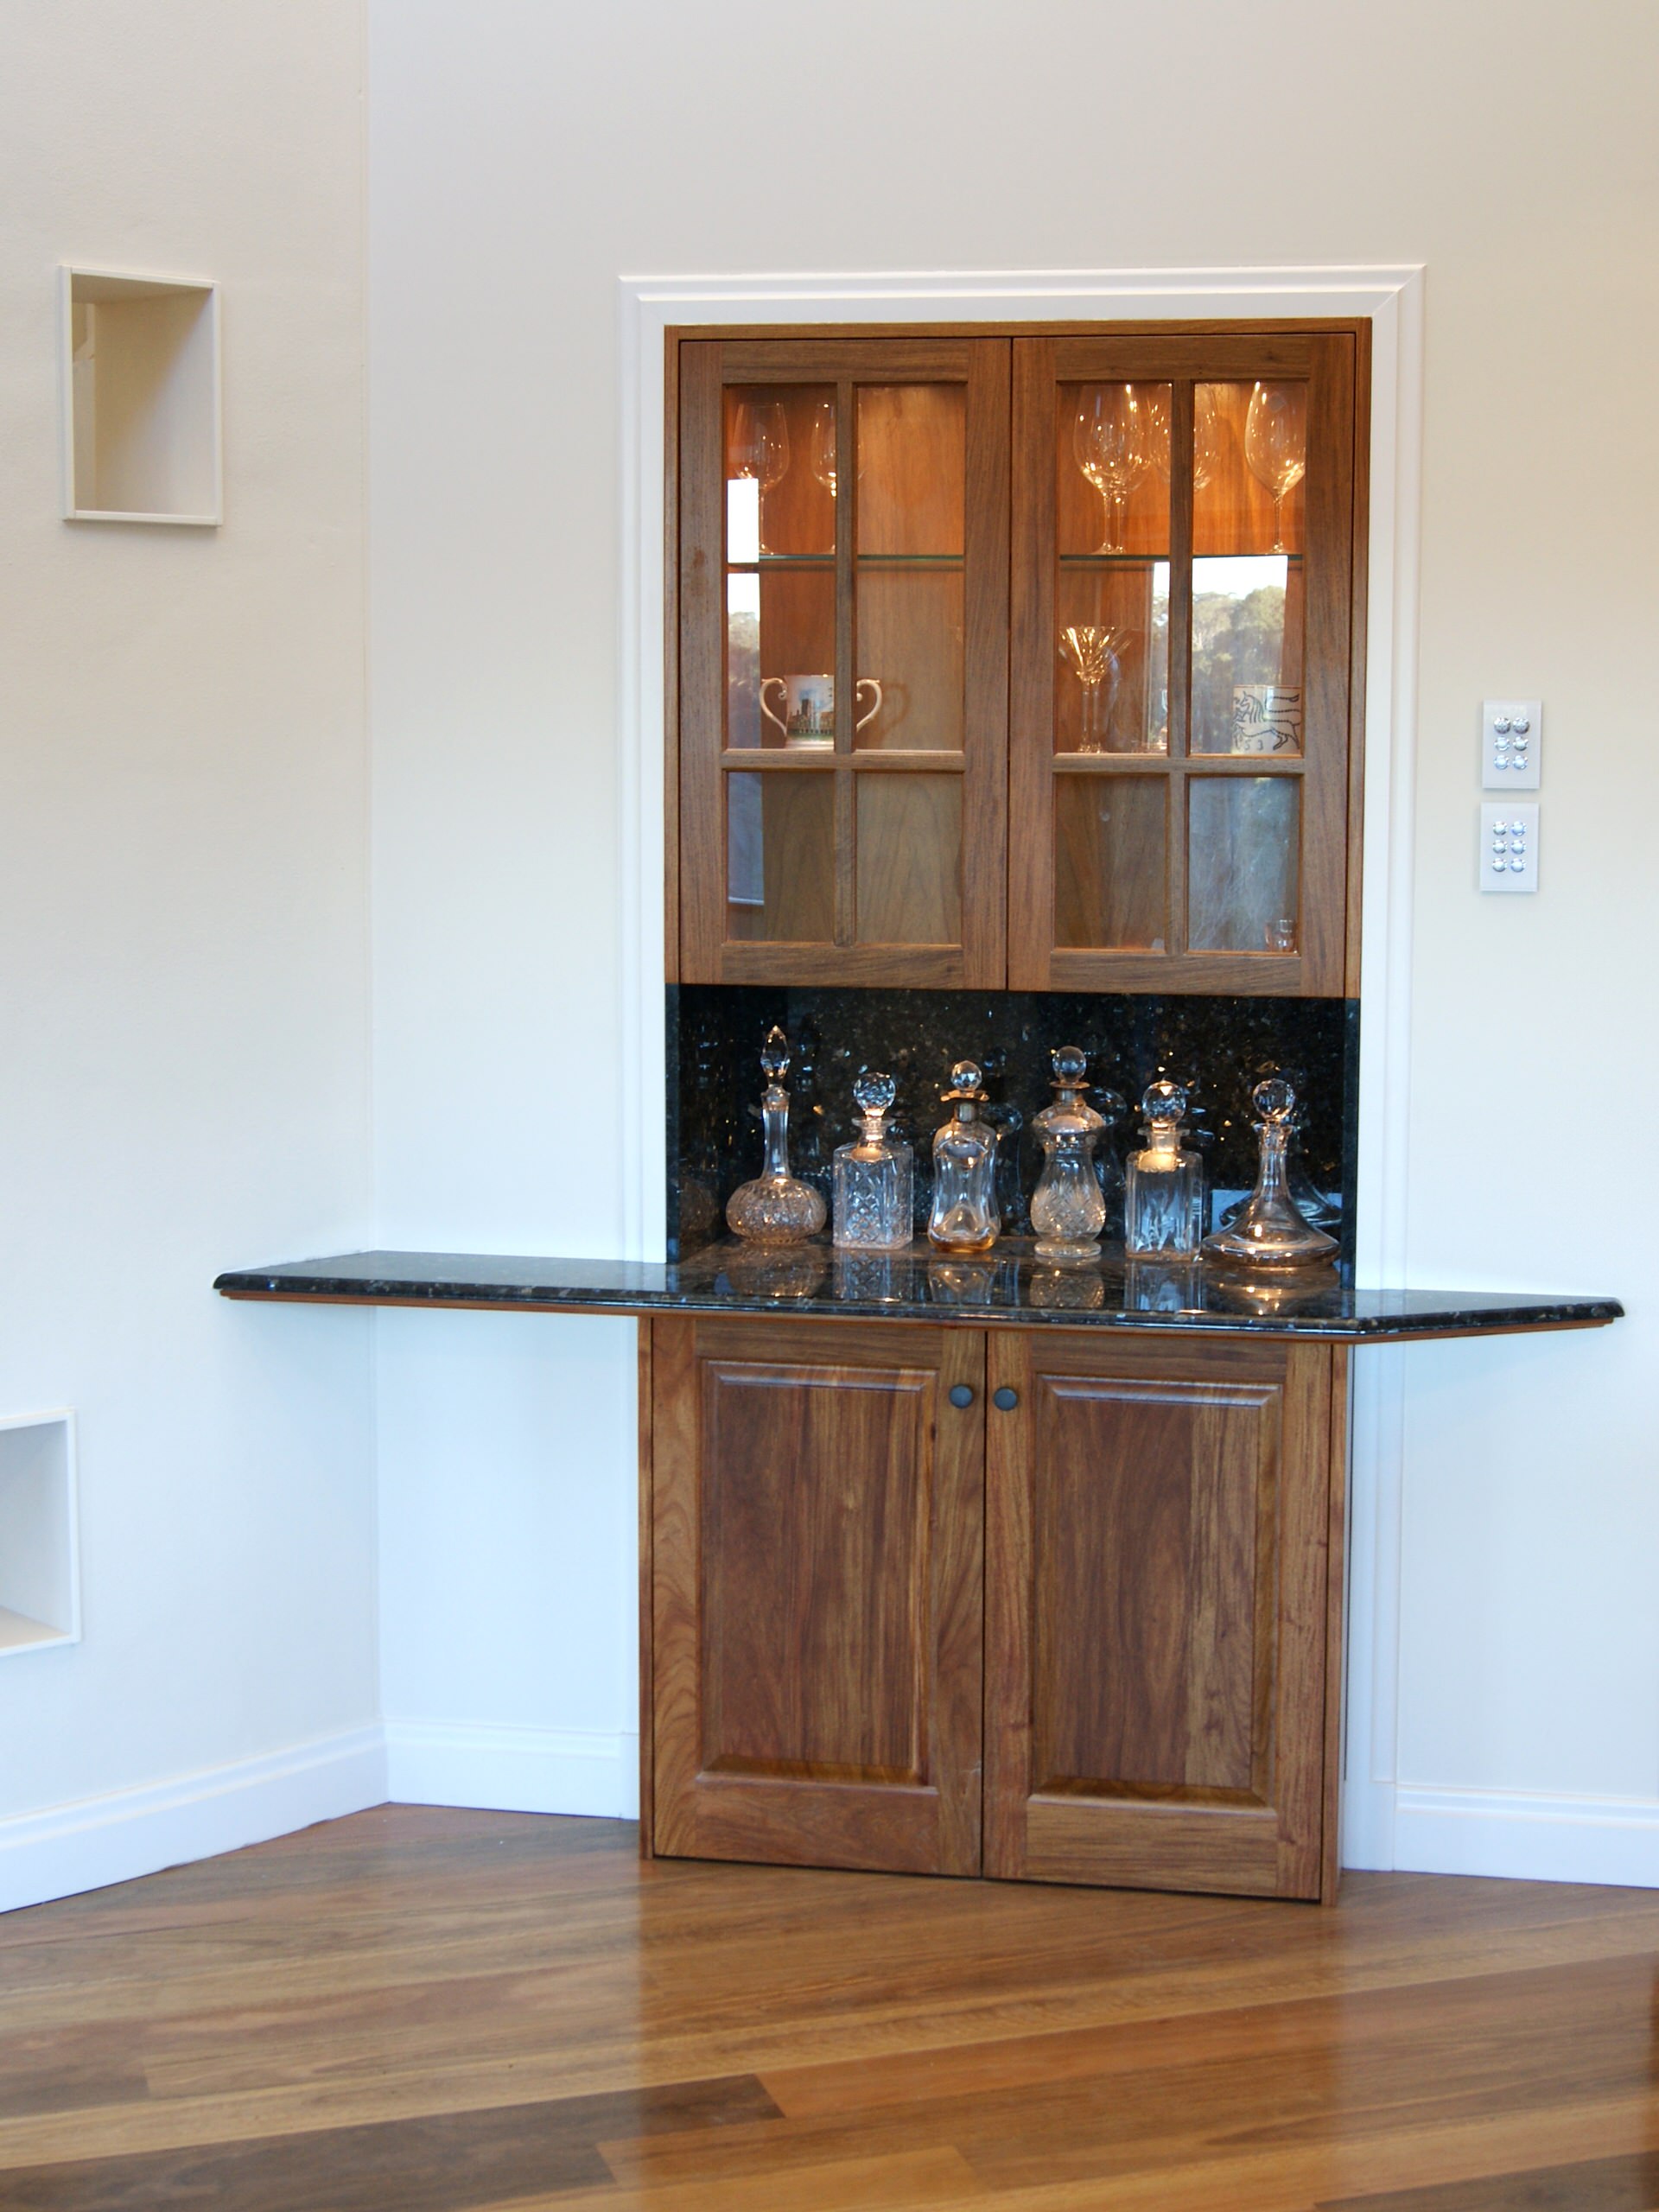 Built-in drinks cabinet